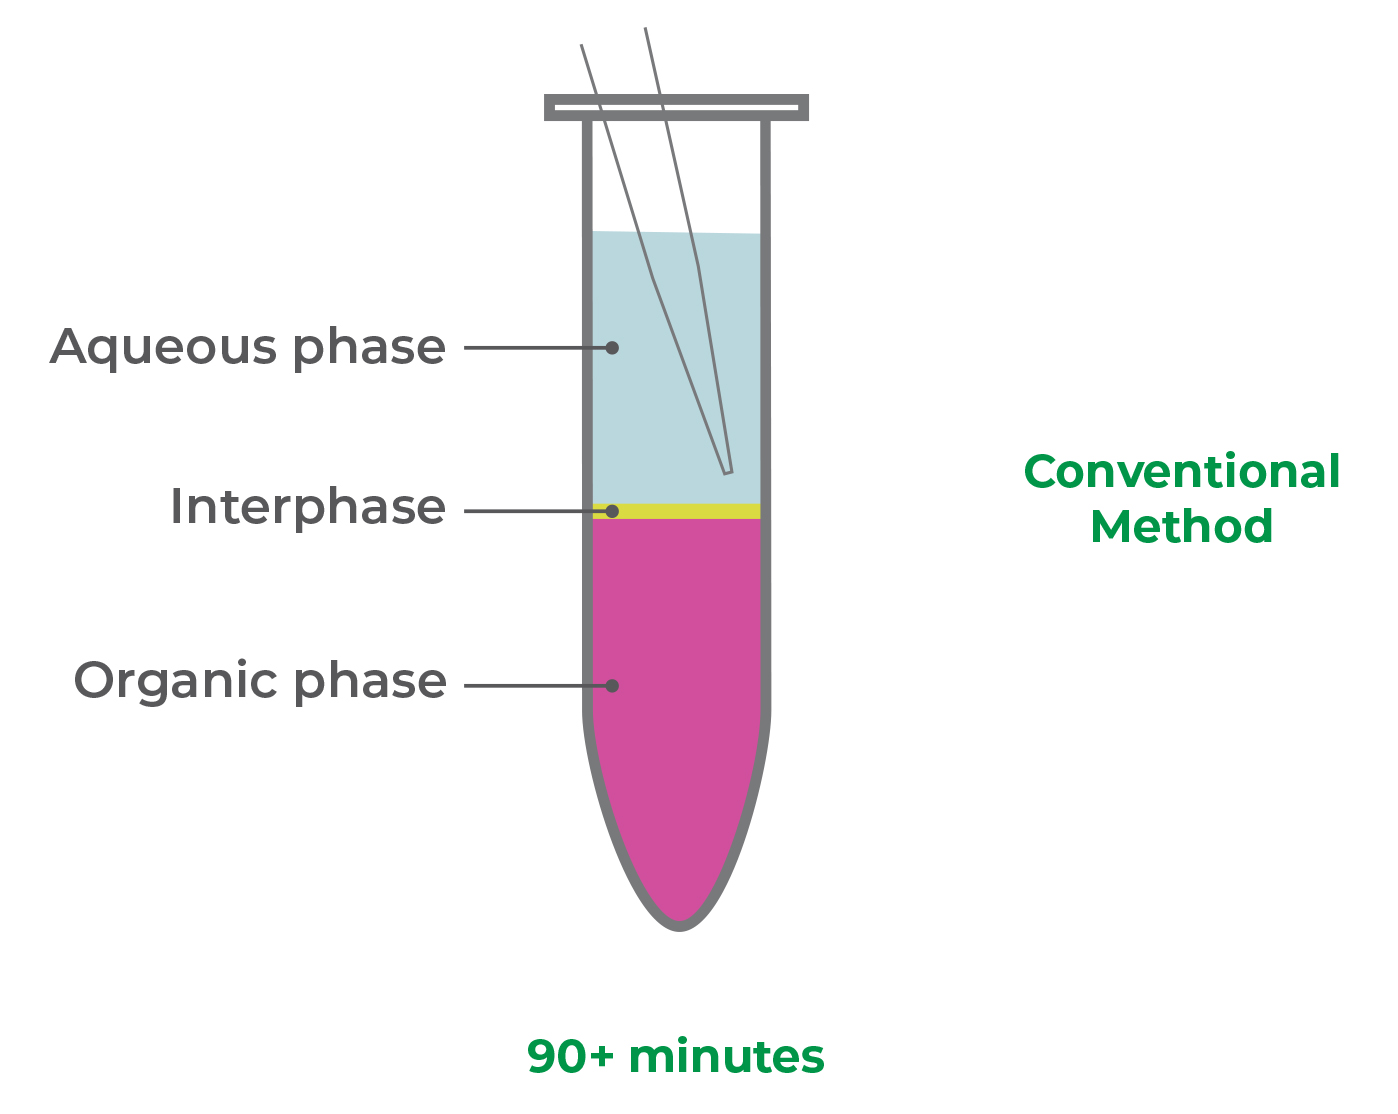 Removal of the aqueous (RNA) phase, without disturbing the inter- and/or organic phases, is a challenging, “make-or-break” step in RNA extraction from TRIzol.